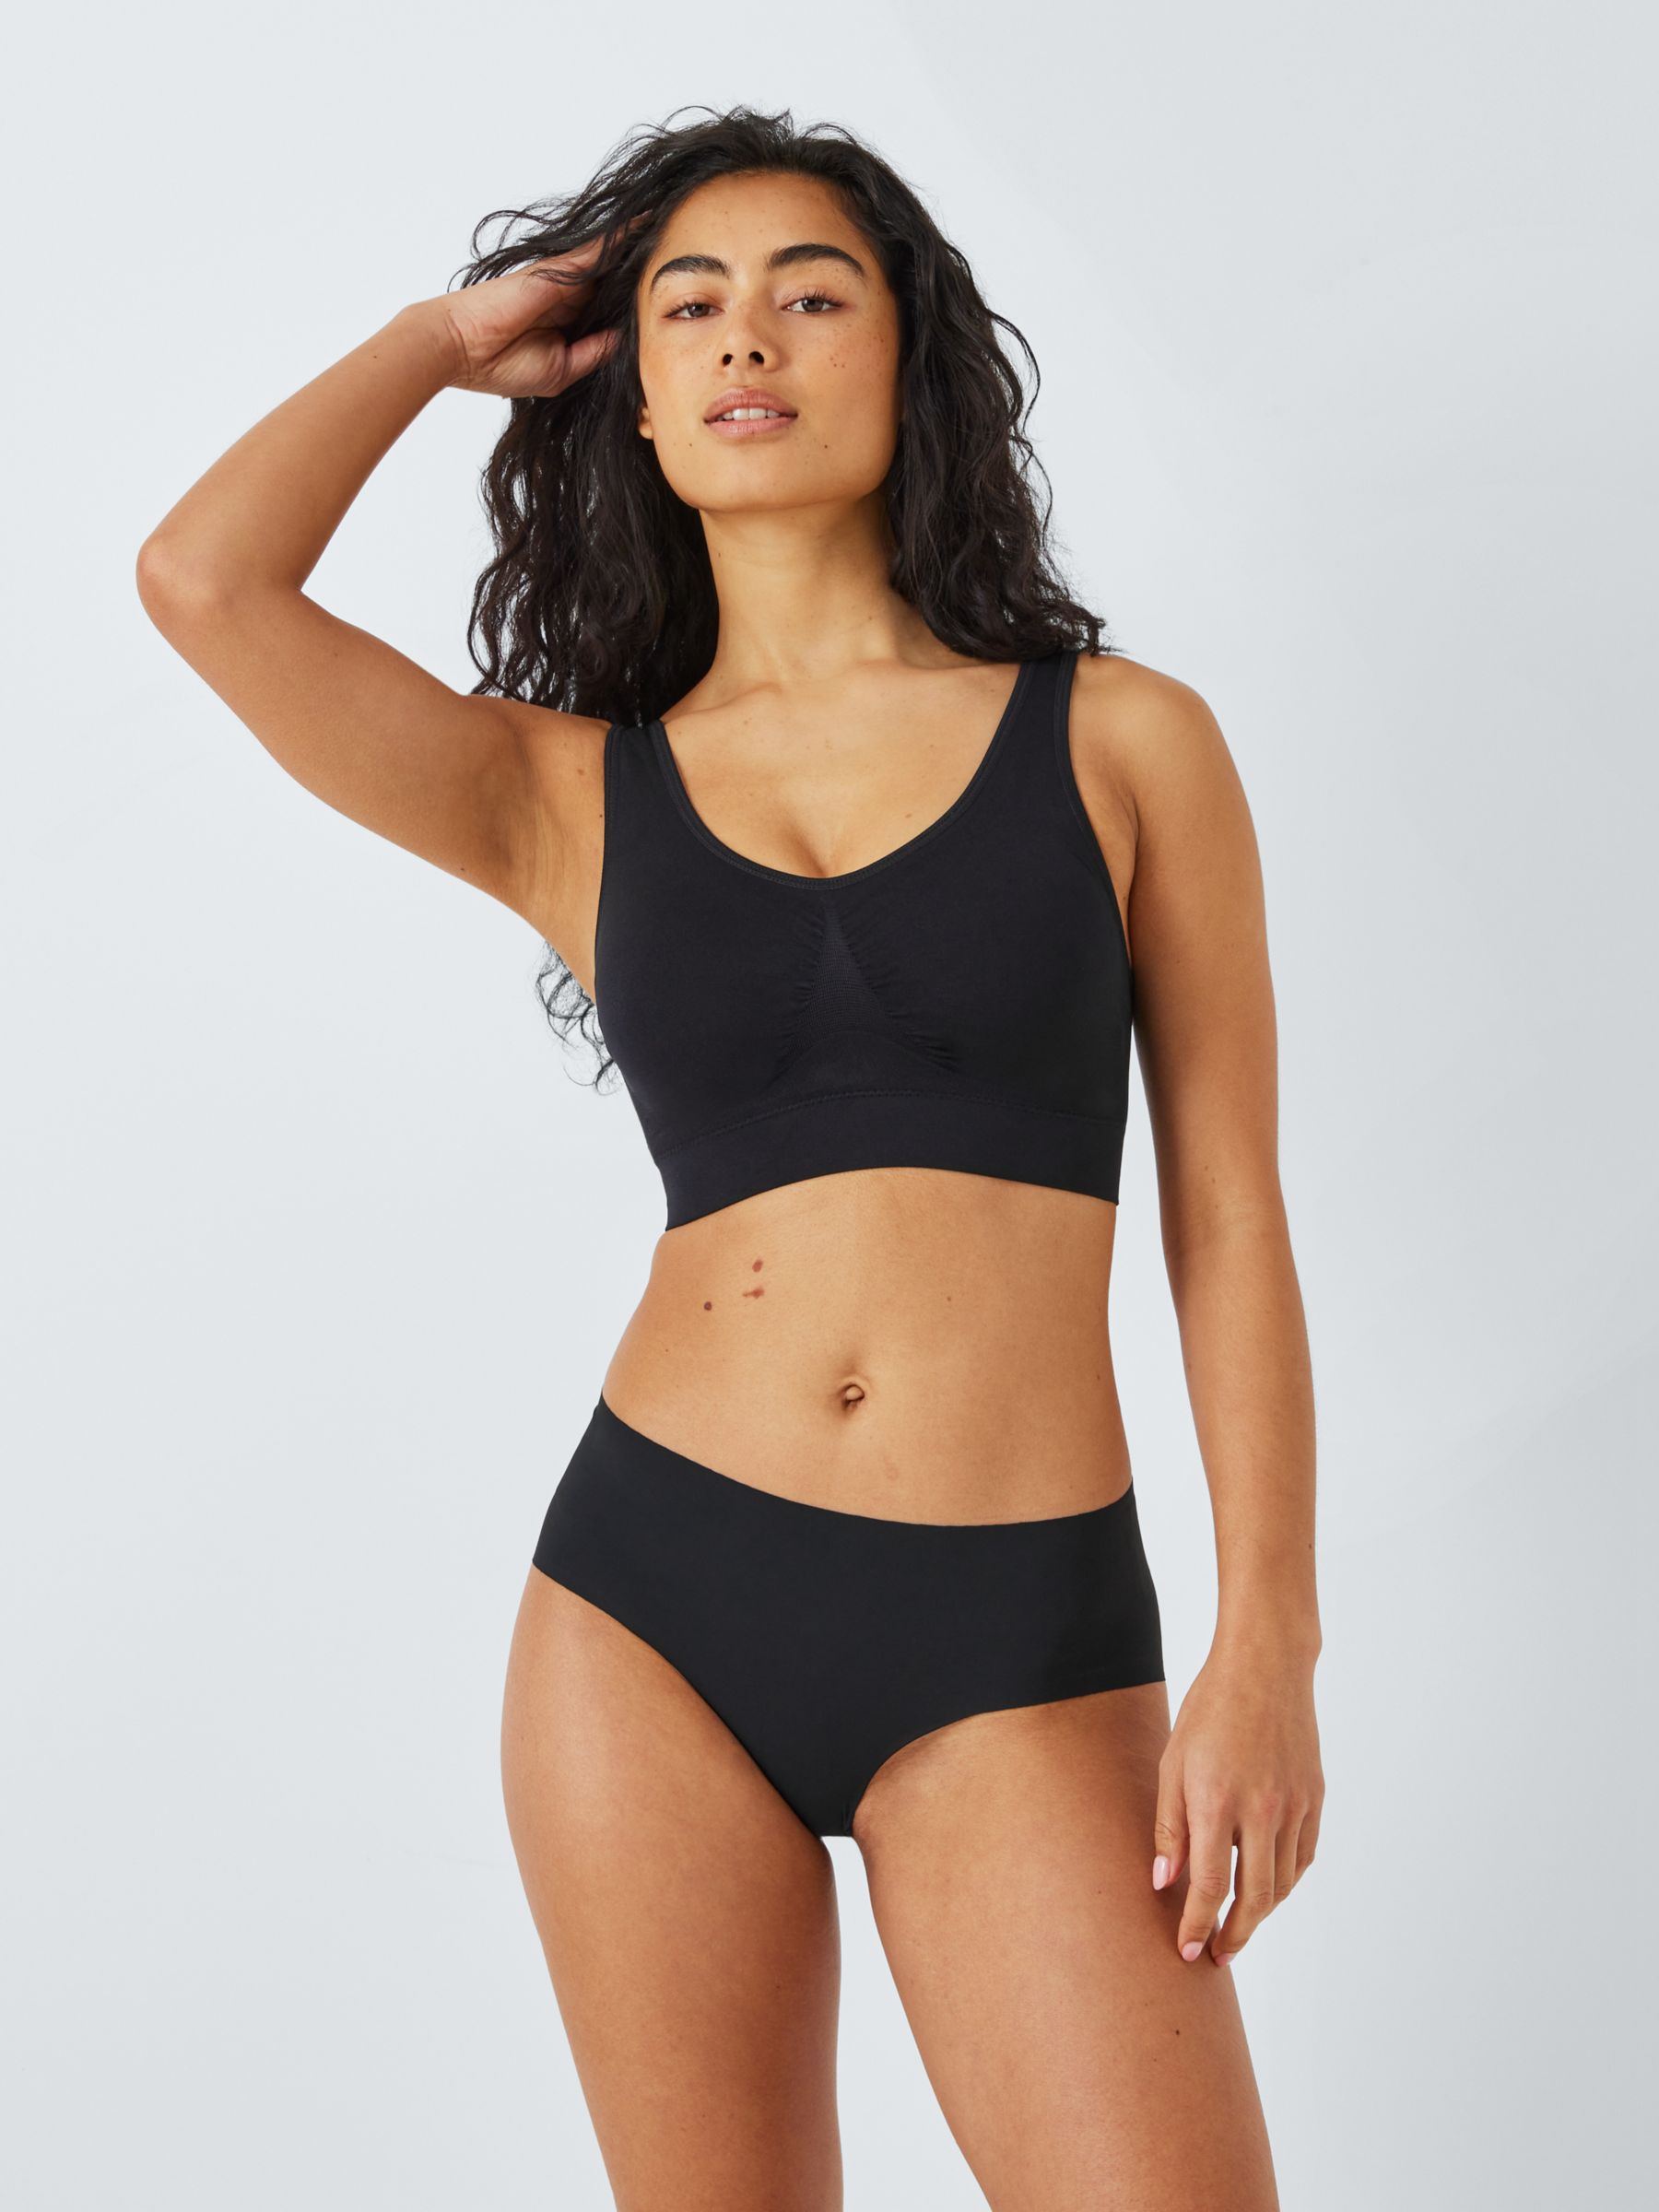 John Lewis has 20% off lingerie and underwear